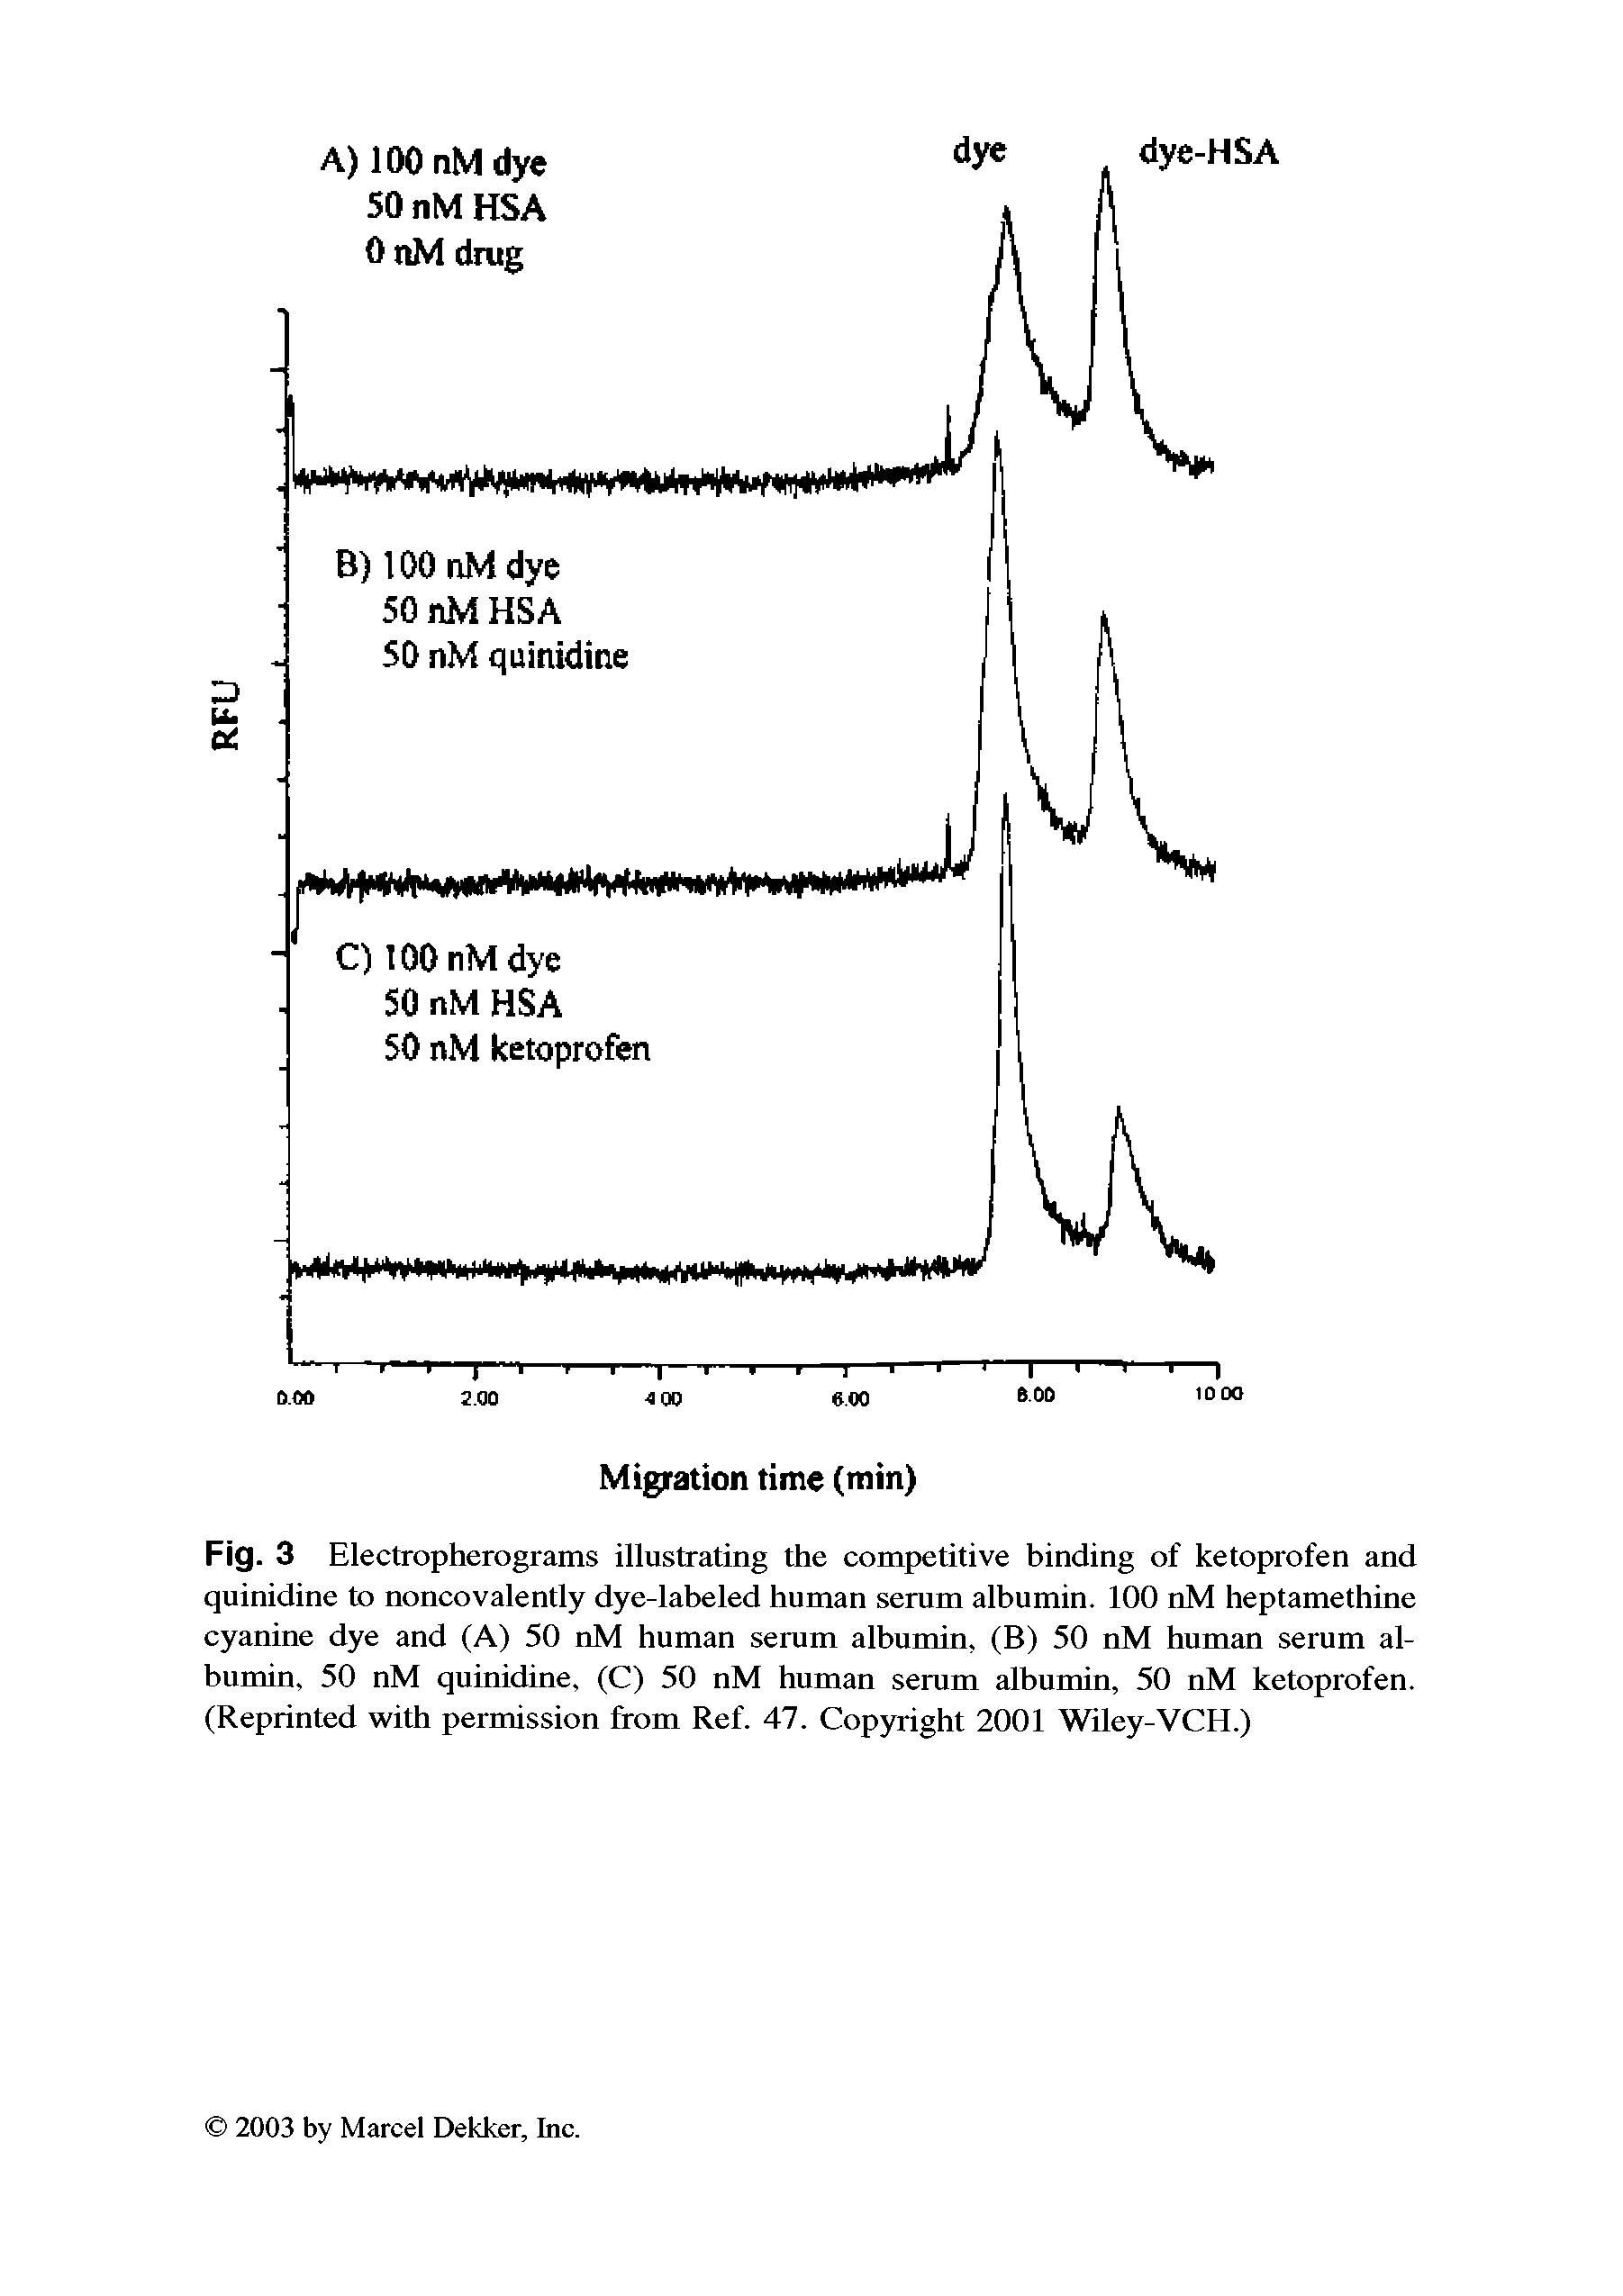 Fig. 3 Electropherograms illustrating the competitive binding of ketoprofen and quinidine to noncovalently dye-labeled human serum albumin. 100 nM heptamethine cyanine dye and (A) 50 nM human serum albumin, (B) 50 nM human serum albumin, 50 nM quinidine, (C) 50 nM human serum albumin, 50 nM ketoprofen. (Reprinted with permission from Ref. 47. Copyright 2001 Wiley-VCH.)...